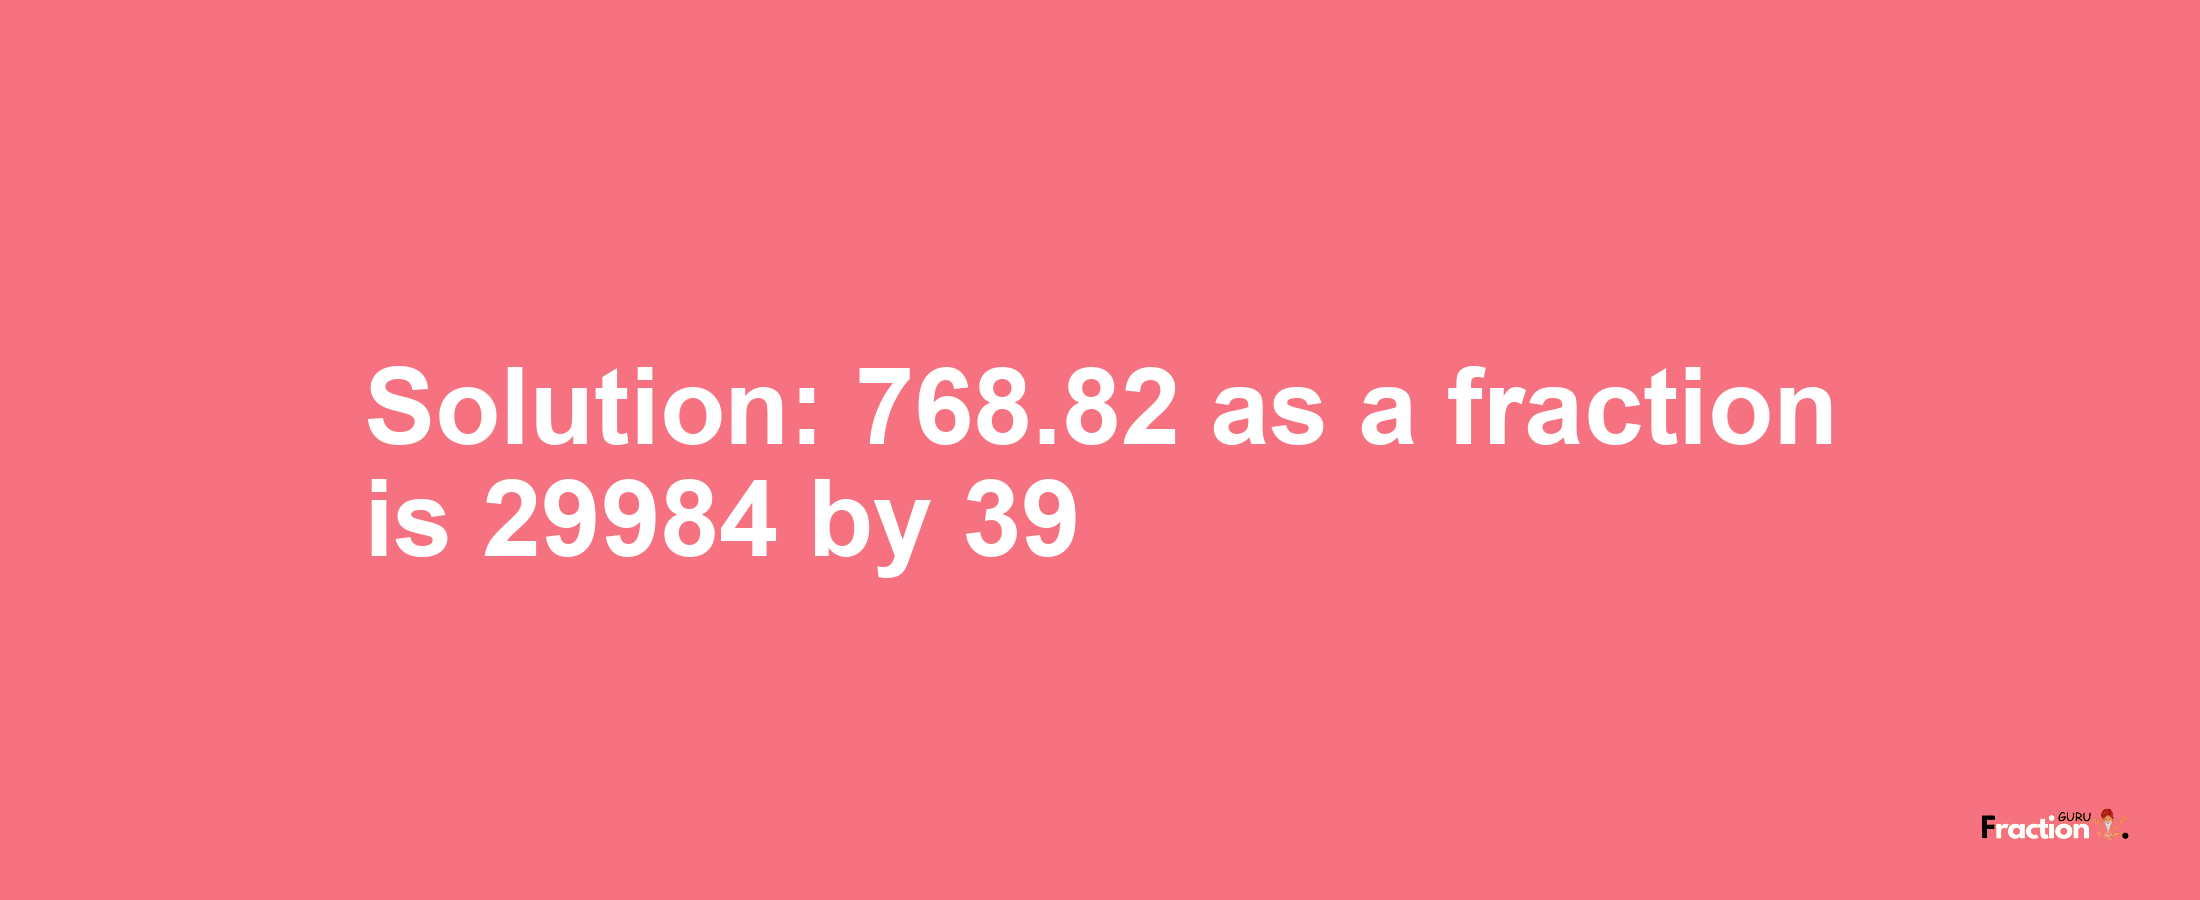 Solution:768.82 as a fraction is 29984/39